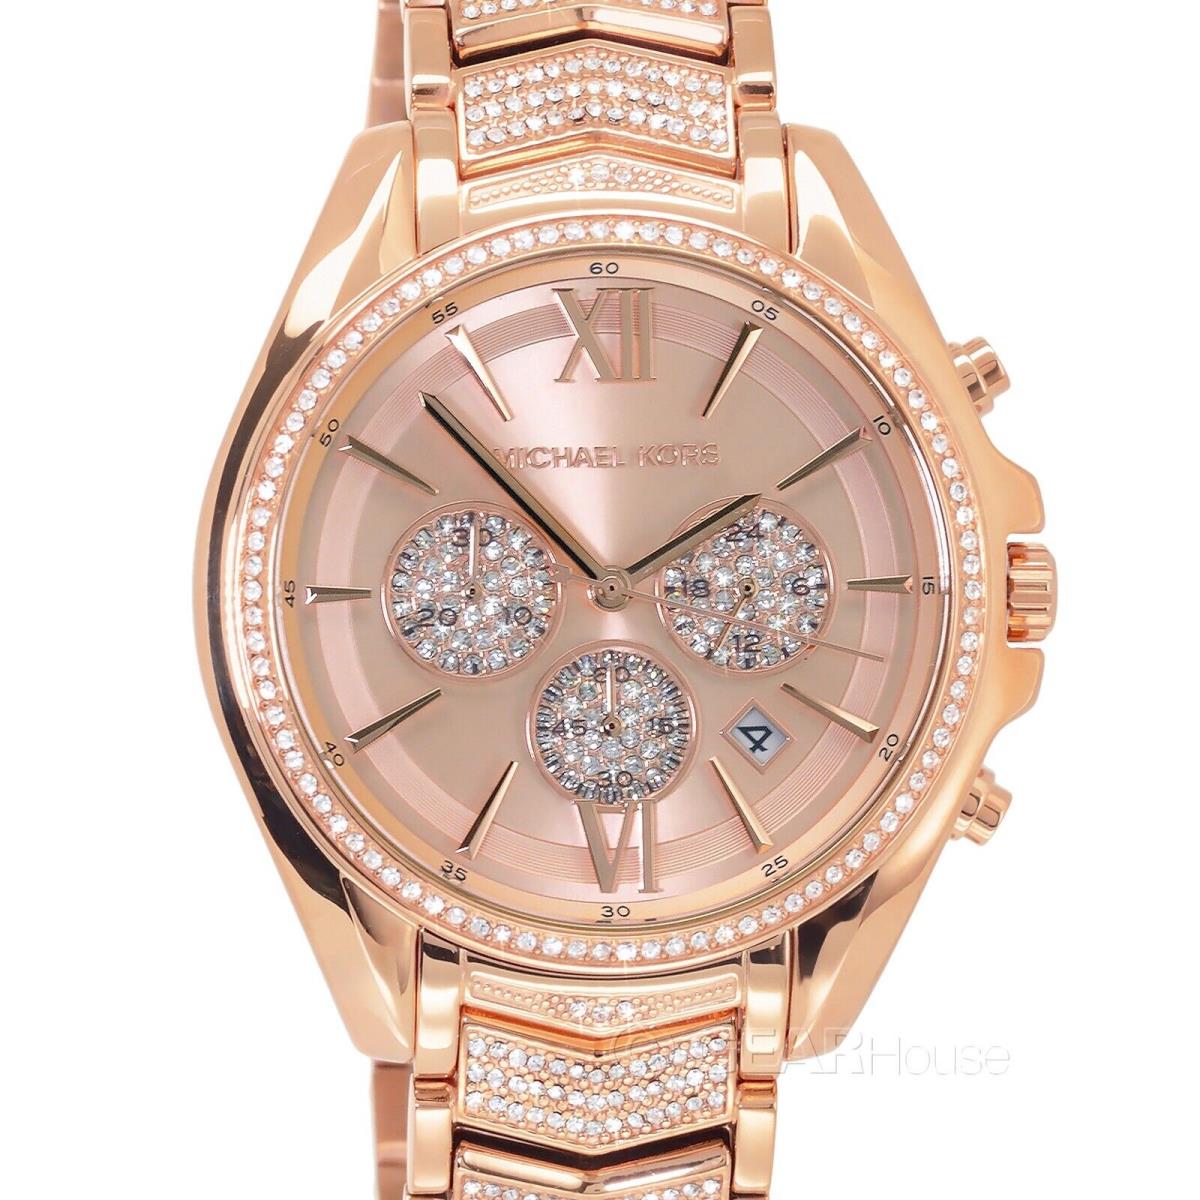 Michael Kors Oversized Whitney Womens Glitz Watch Rose Gold Pave Stainless Steel - Dial: Rose Gold, Band: Rose Gold, Bezel: Rose Gold